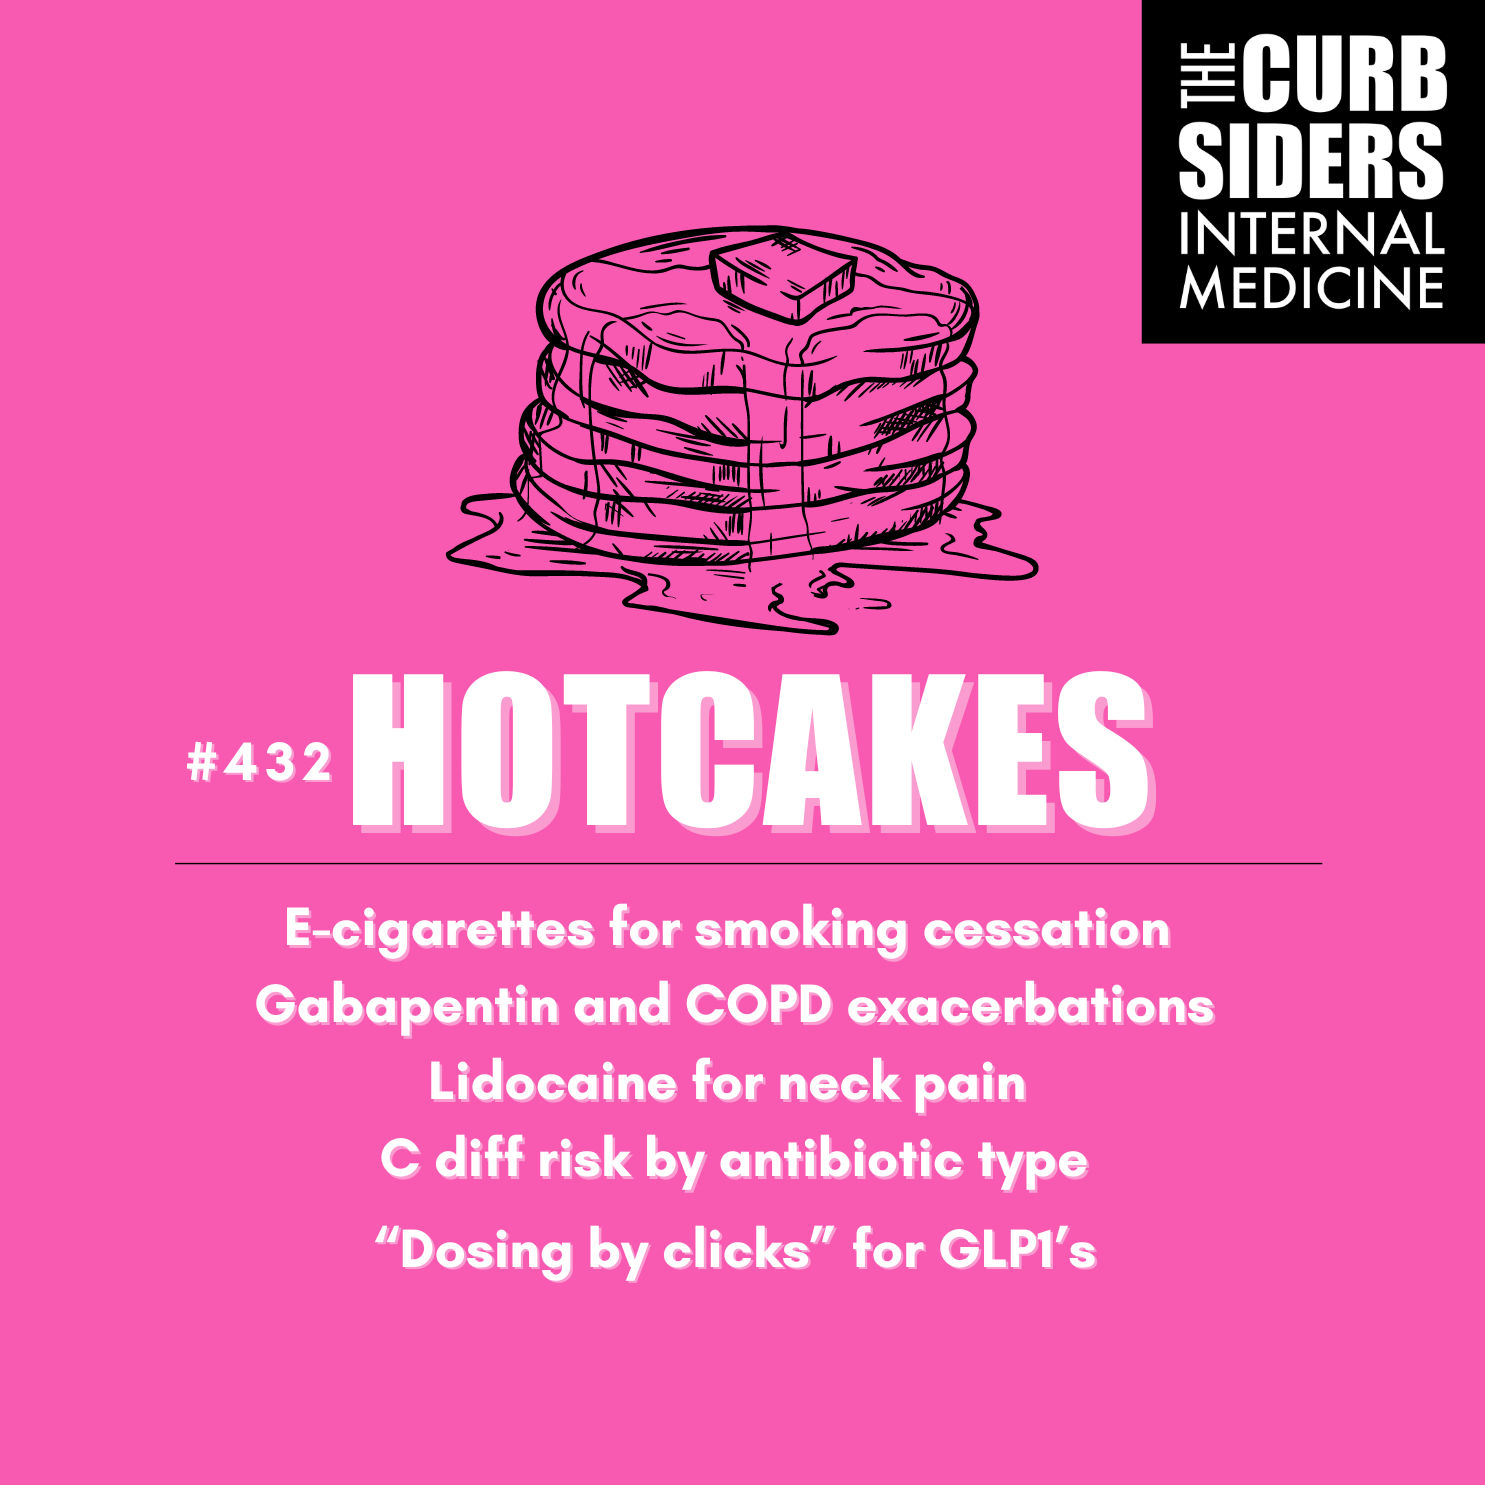 #432 Hotcakes: E-cigarettes for smoking cessation, Gabapentin and COPD exacerbations, Lidocaine for neck pain, C diff risk by antibiotic type, and “dosing by clicks” for GLP1’s